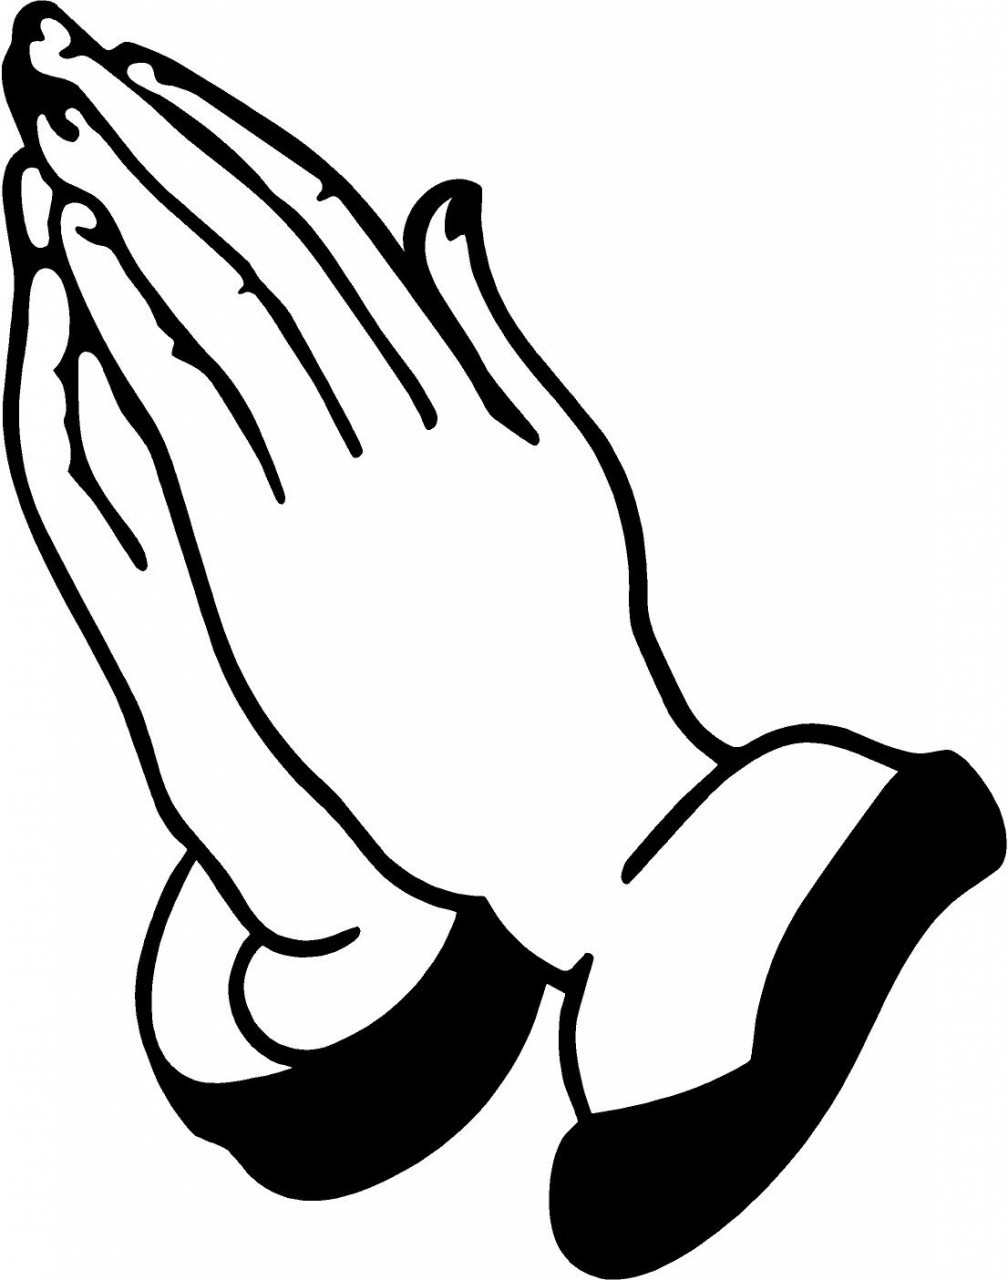 clipart image praying hands - photo #20